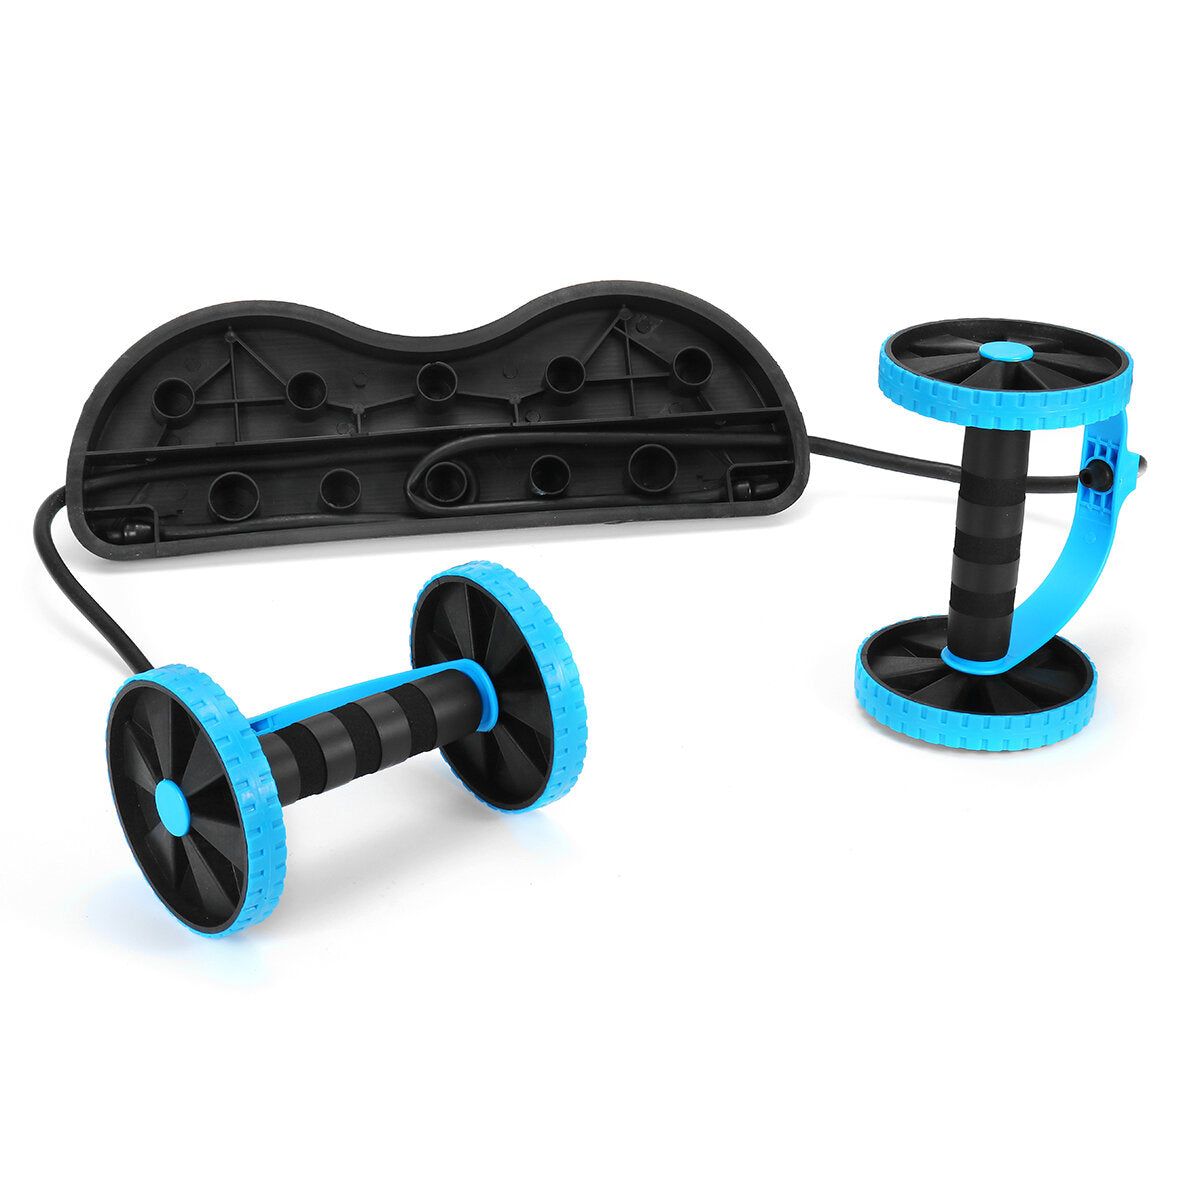 2 In 1 Abdominal Wheel Roller Resistance Bands Fitness Muscle Training Double Wheel Strength Exercise Tools